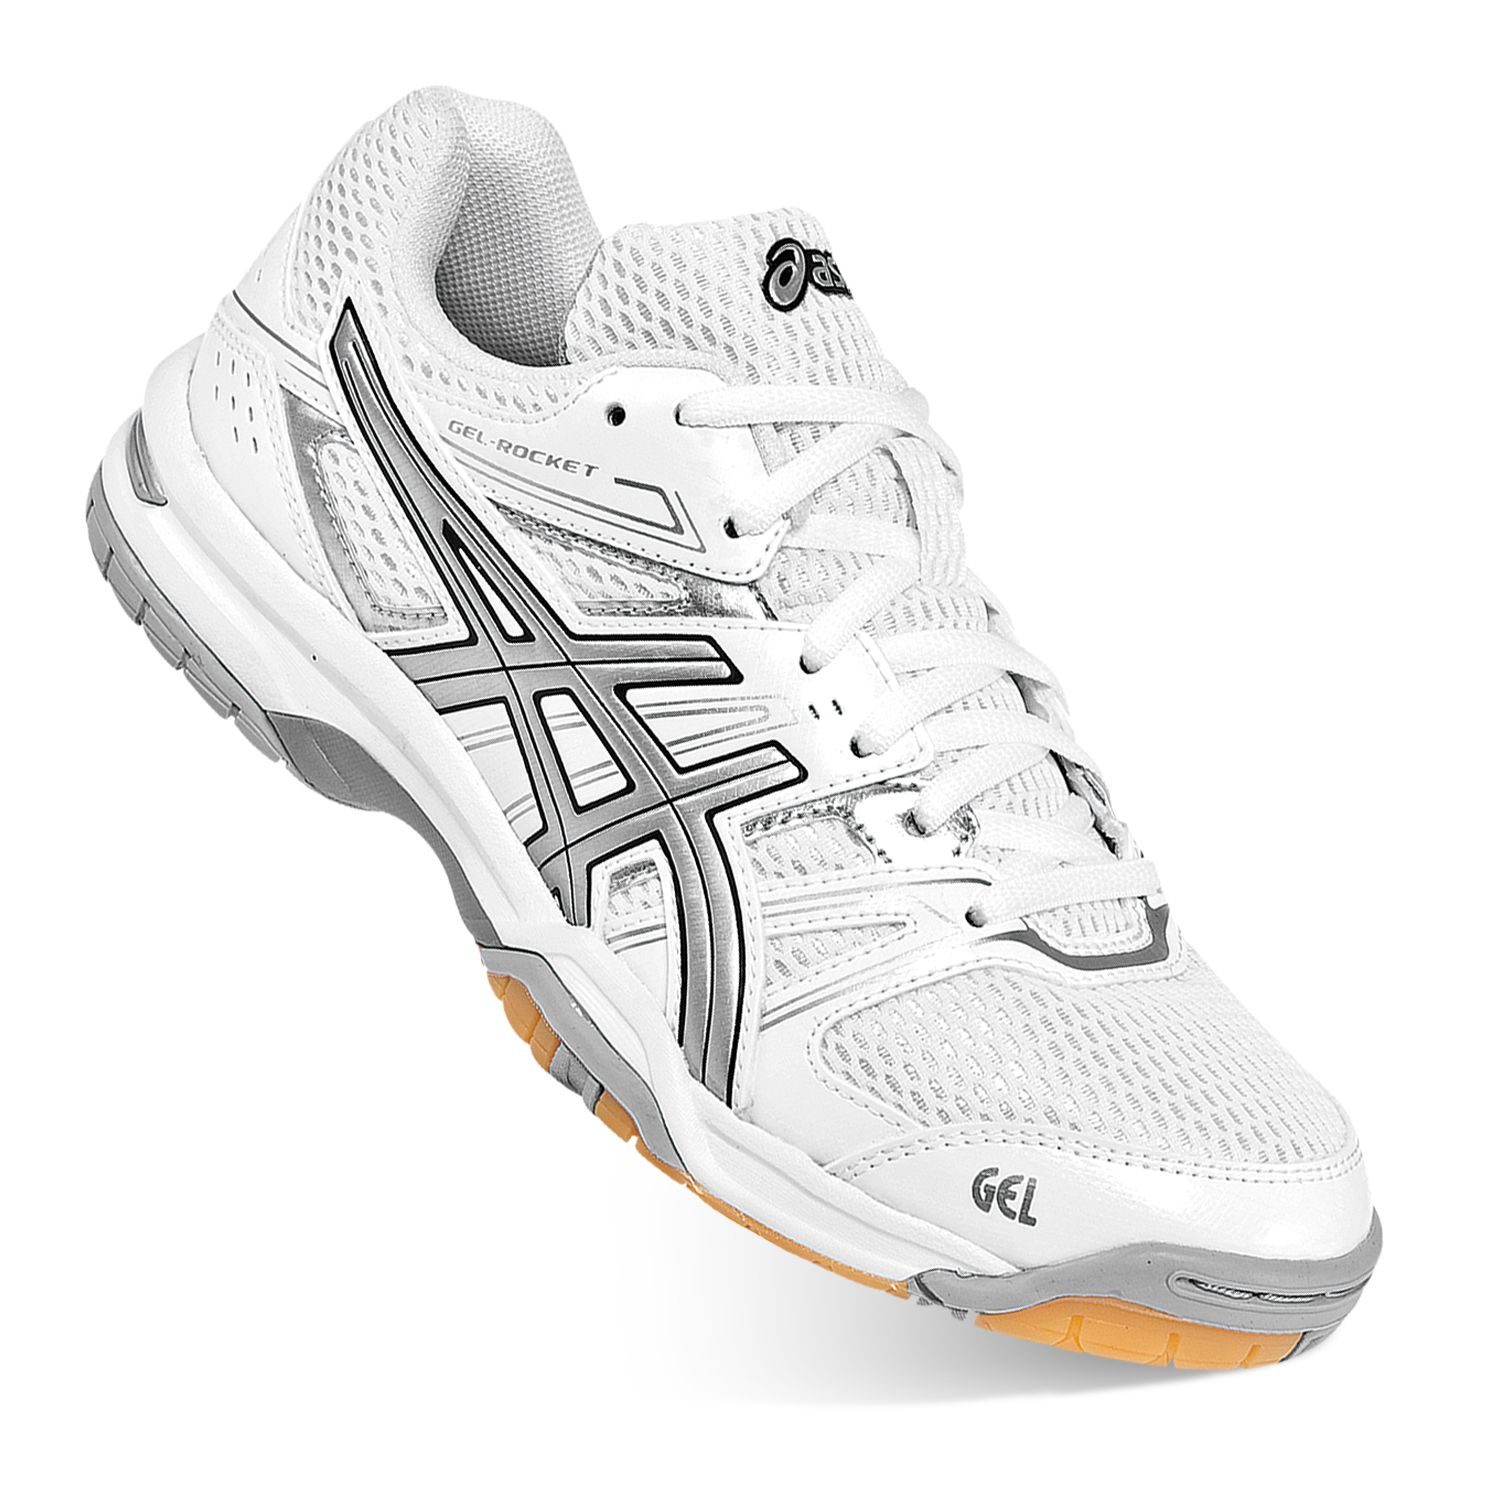 asics gel rocket 7 volleyball shoes